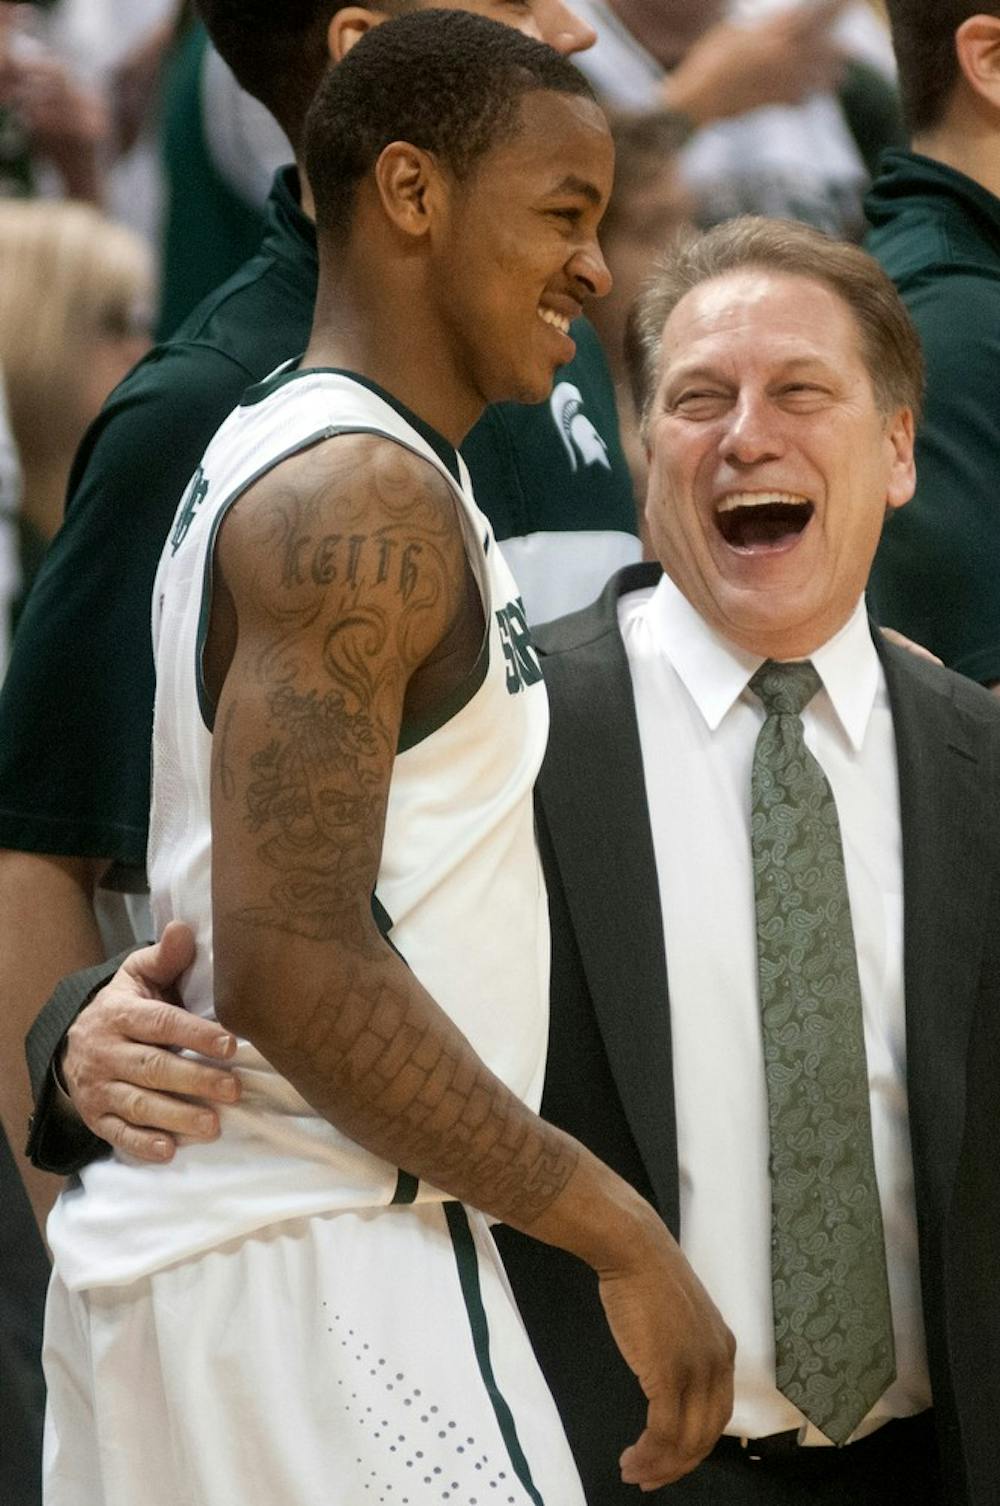 <p>Head coach Tom Izzo laughs with former MSU guard Keith Appling at the end of the game against Iowa on March 6, 2014, at Breslin Center. The Spartans defeated the Hawkeyes 86-76. Julia Nagy/The State News</p>